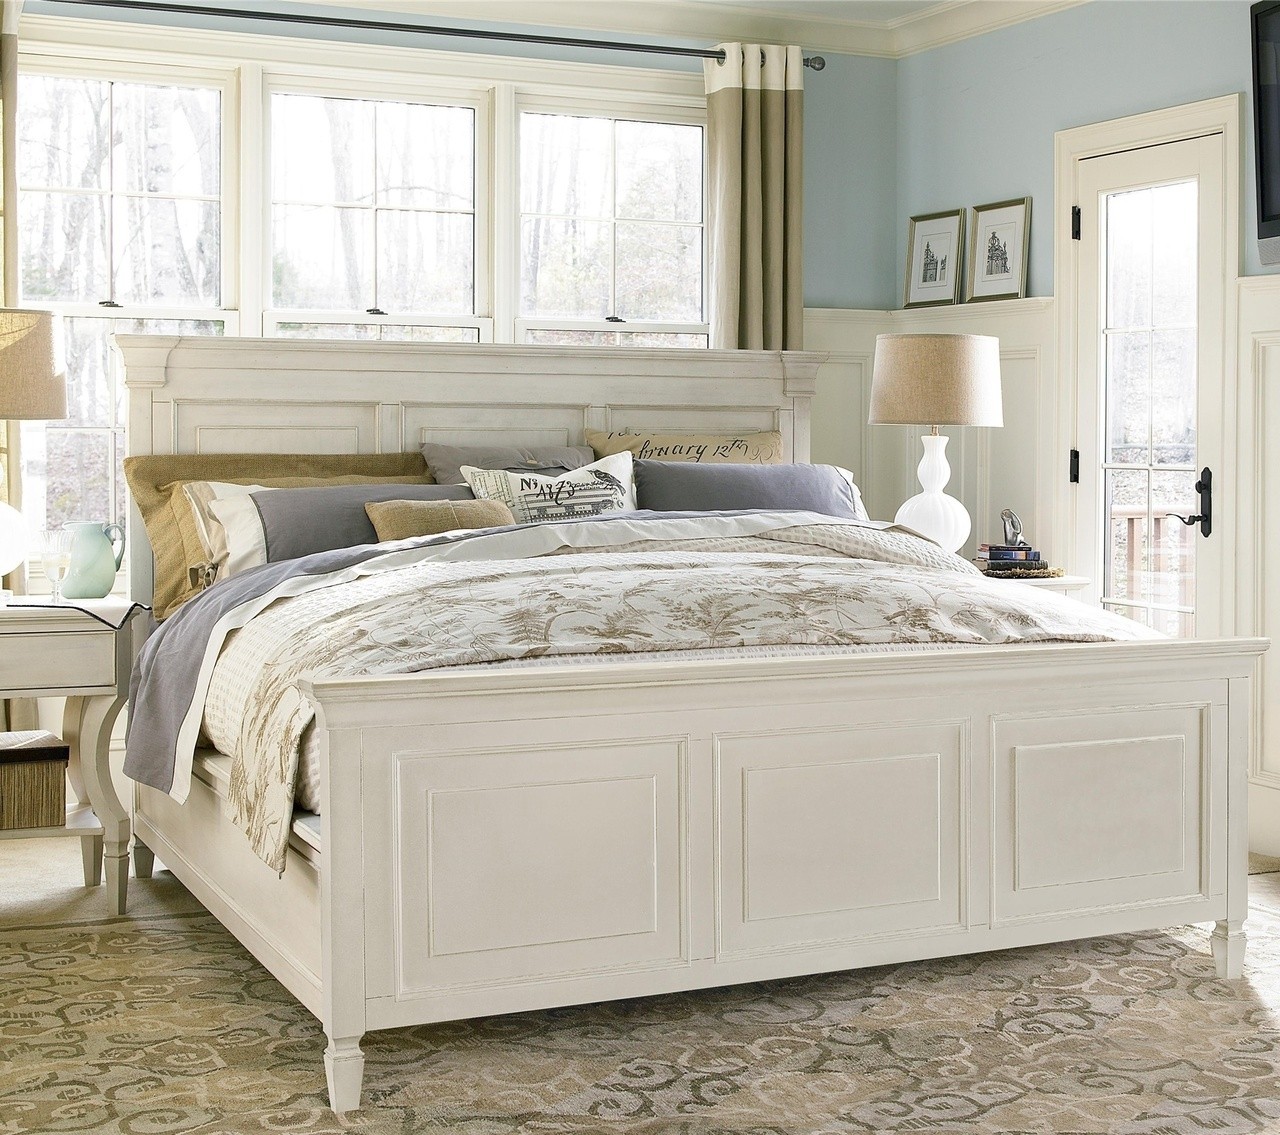 Distressed white queen bed frame bed frames ideas